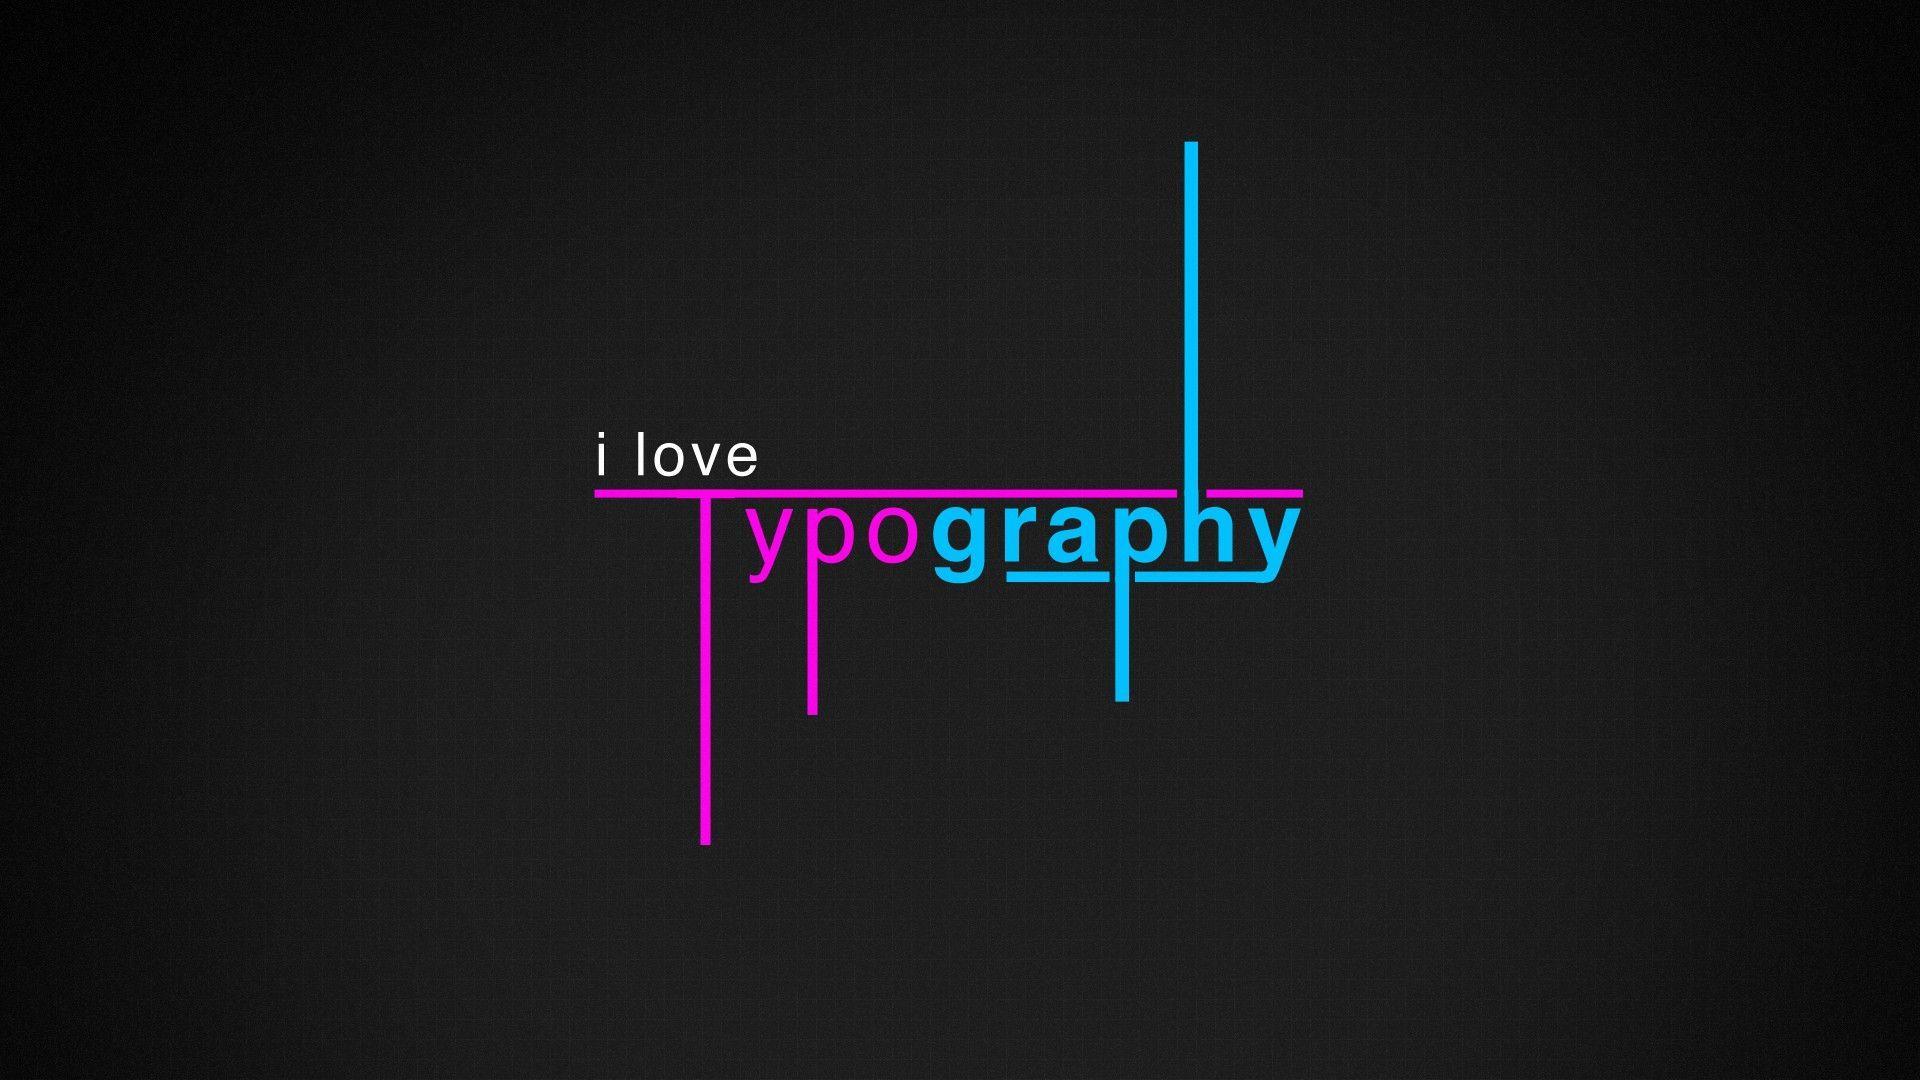 Download the Line Typography Wallpaper, Line Typography iPhone